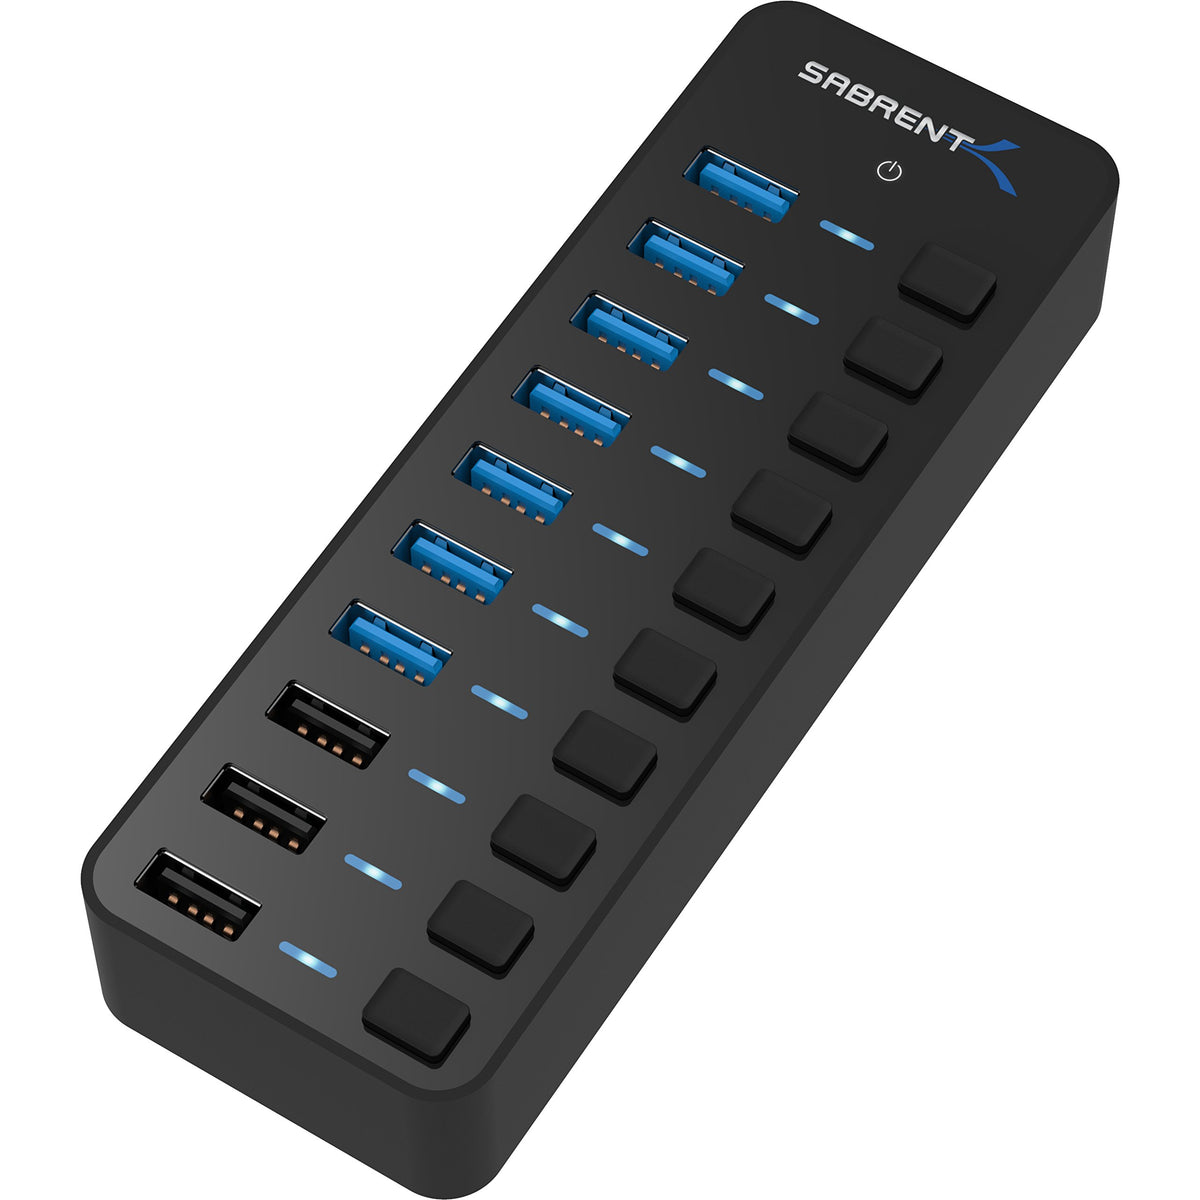 USB 3.0 Hub With Power Switches